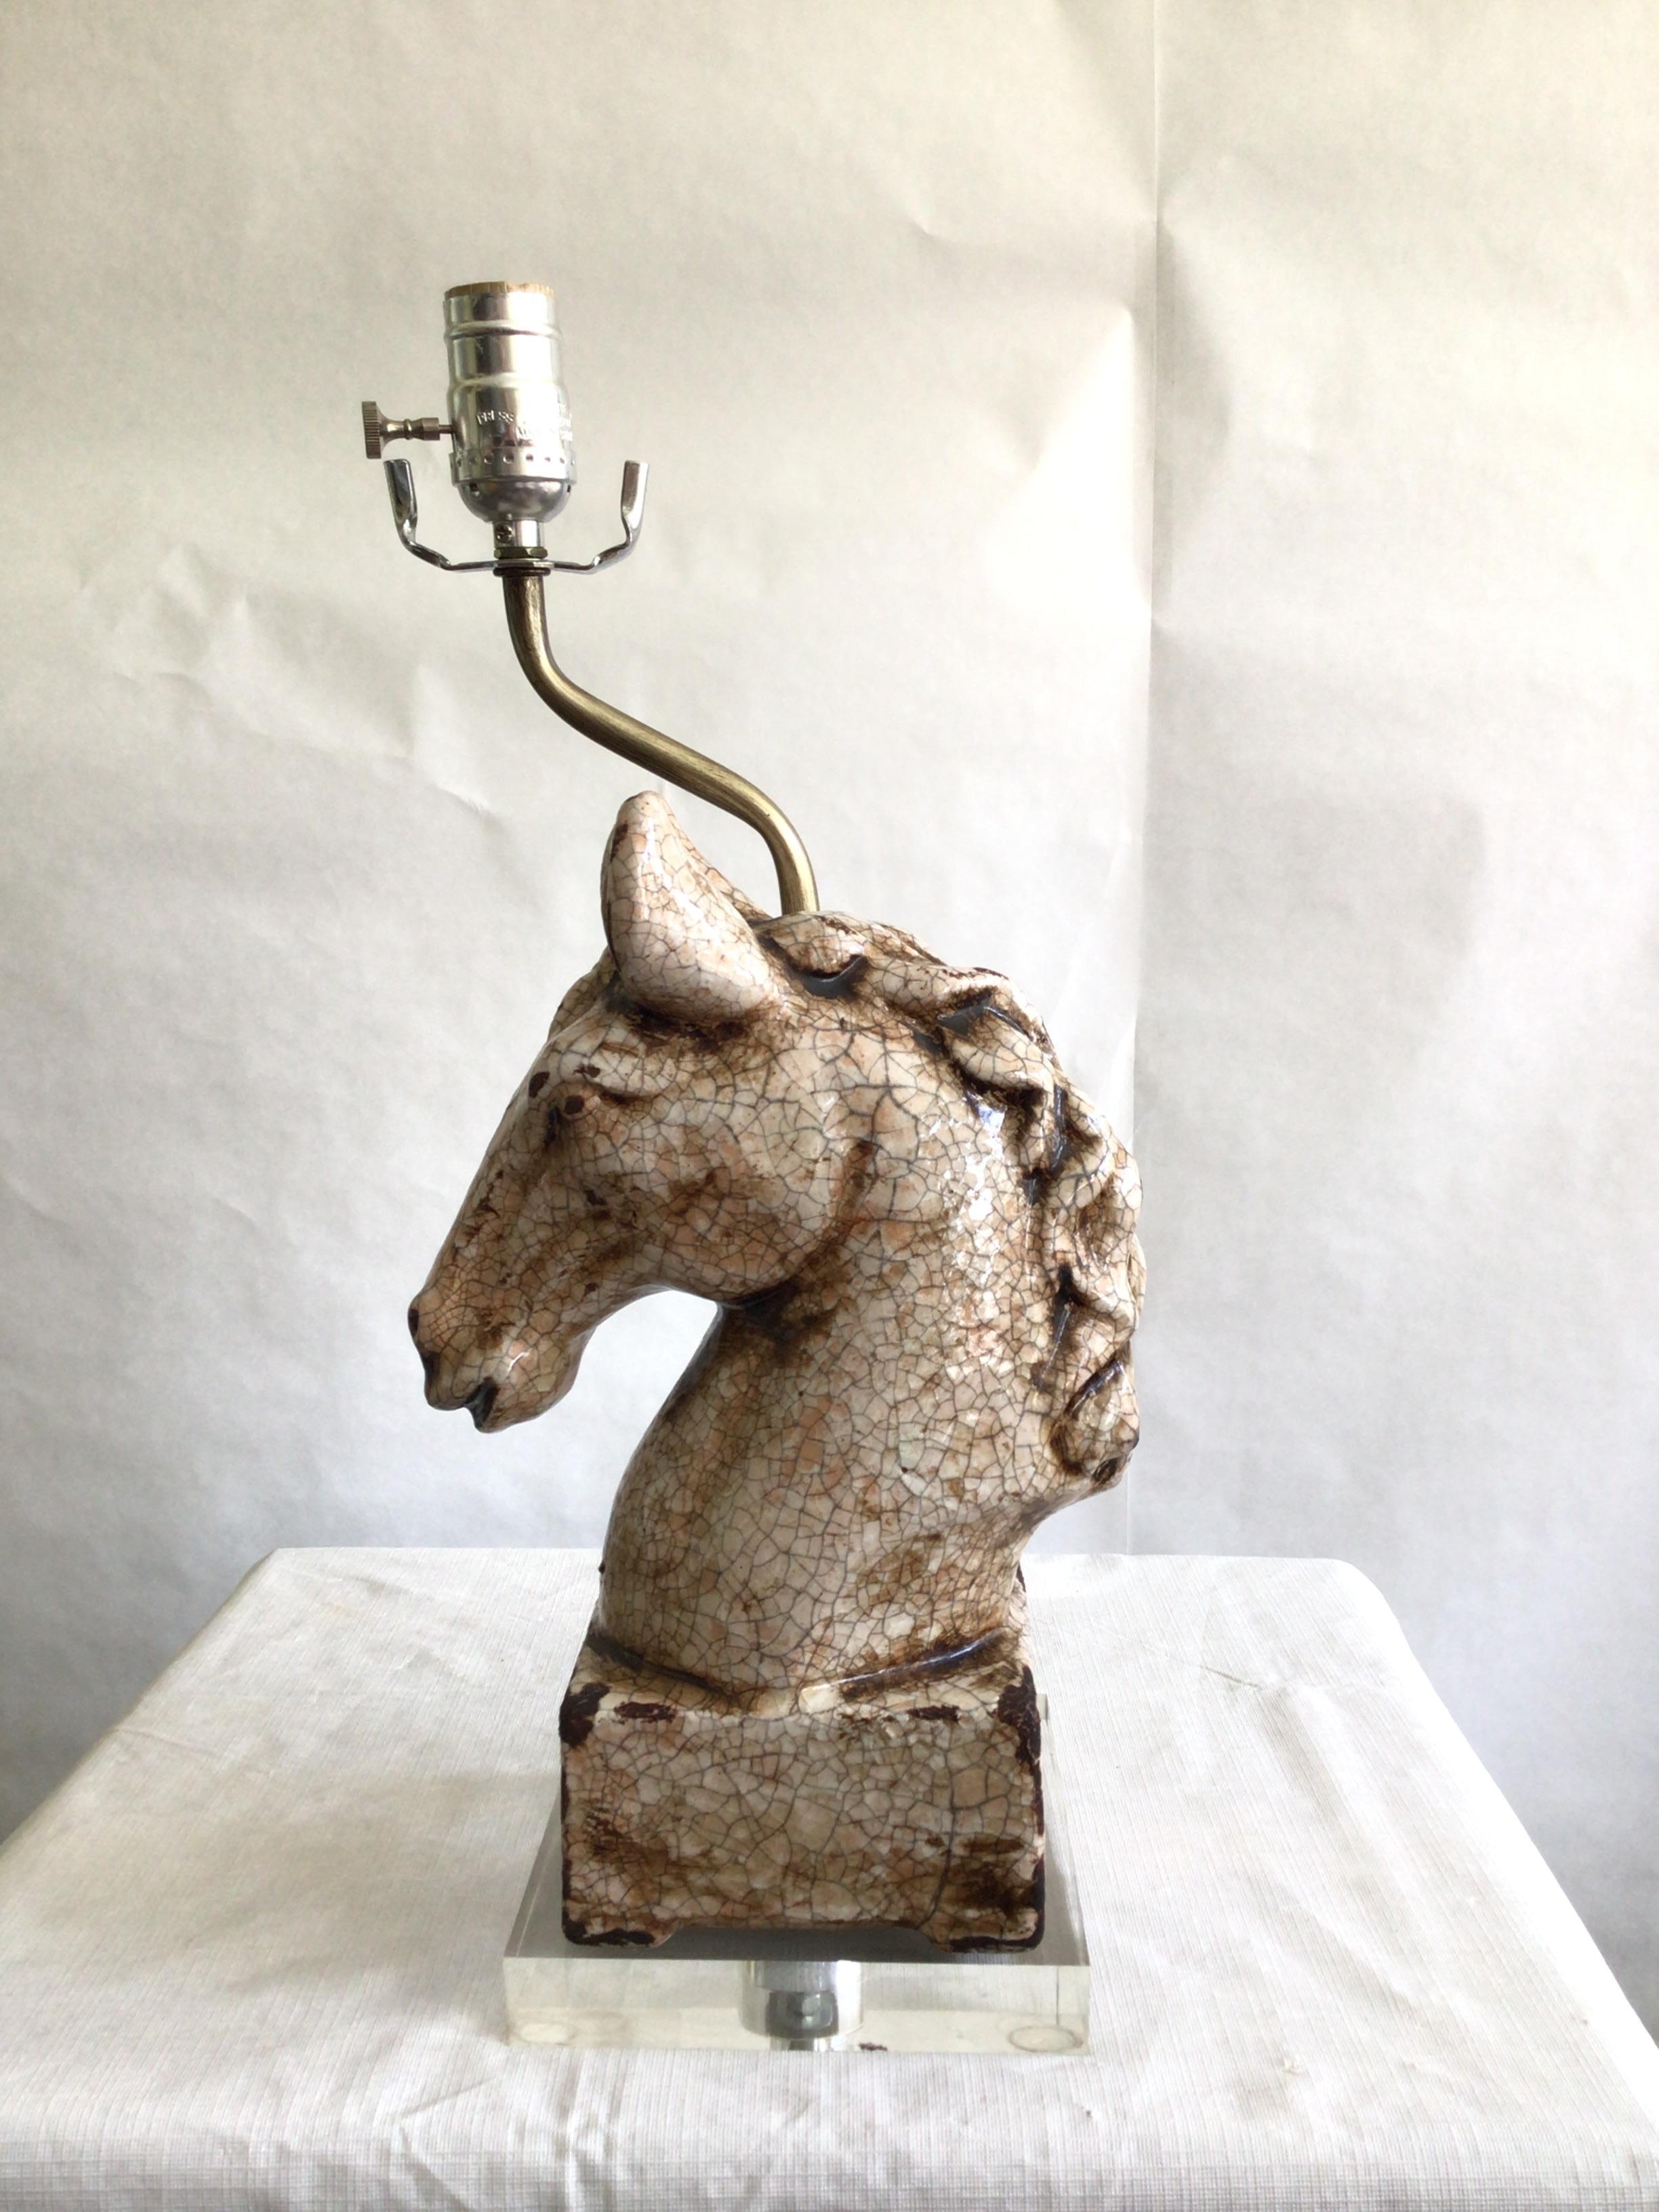 1960s Ceramic Crackle Glazed Horse Lamp On Lucite Base
A beautiful equestrian accent elevated by a lucite base
Height given is to top of socket
Needs Rewiring